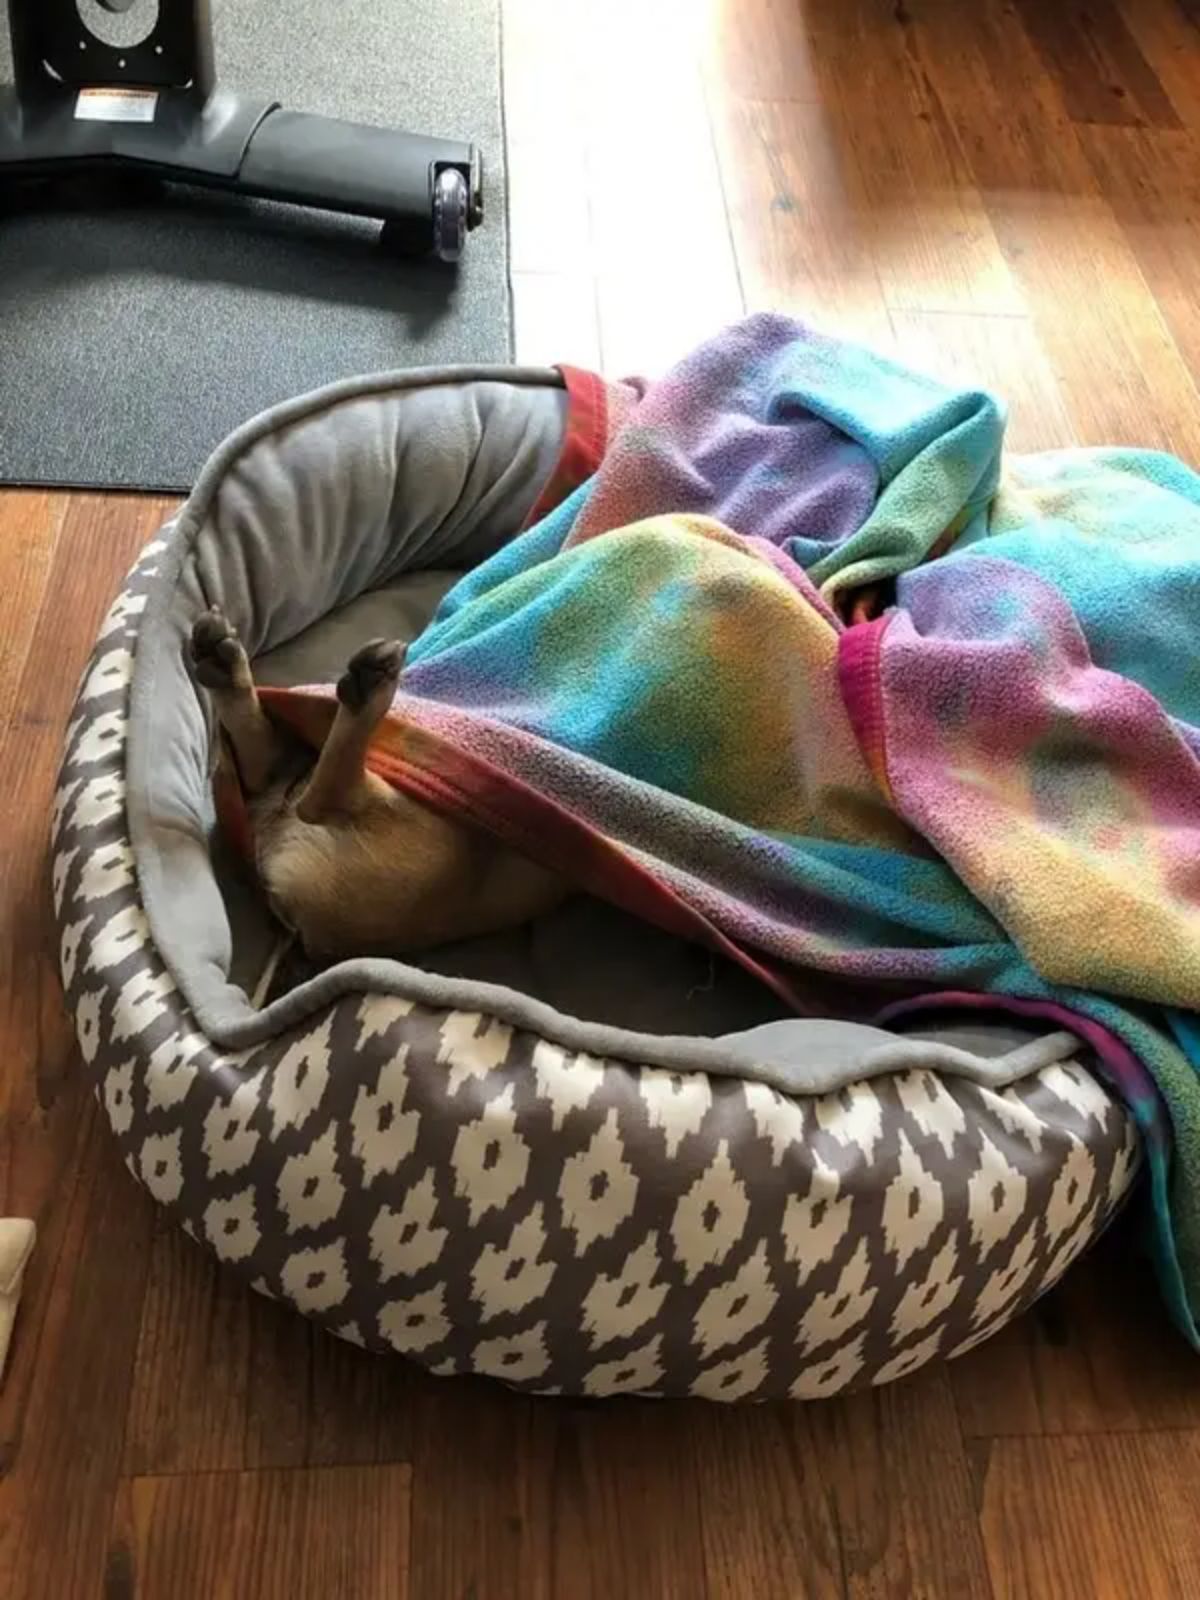 brown dog laying belly up on gre, brown and white patterned dog bed and everything except the back legs are under a rainbow tie dye blanket